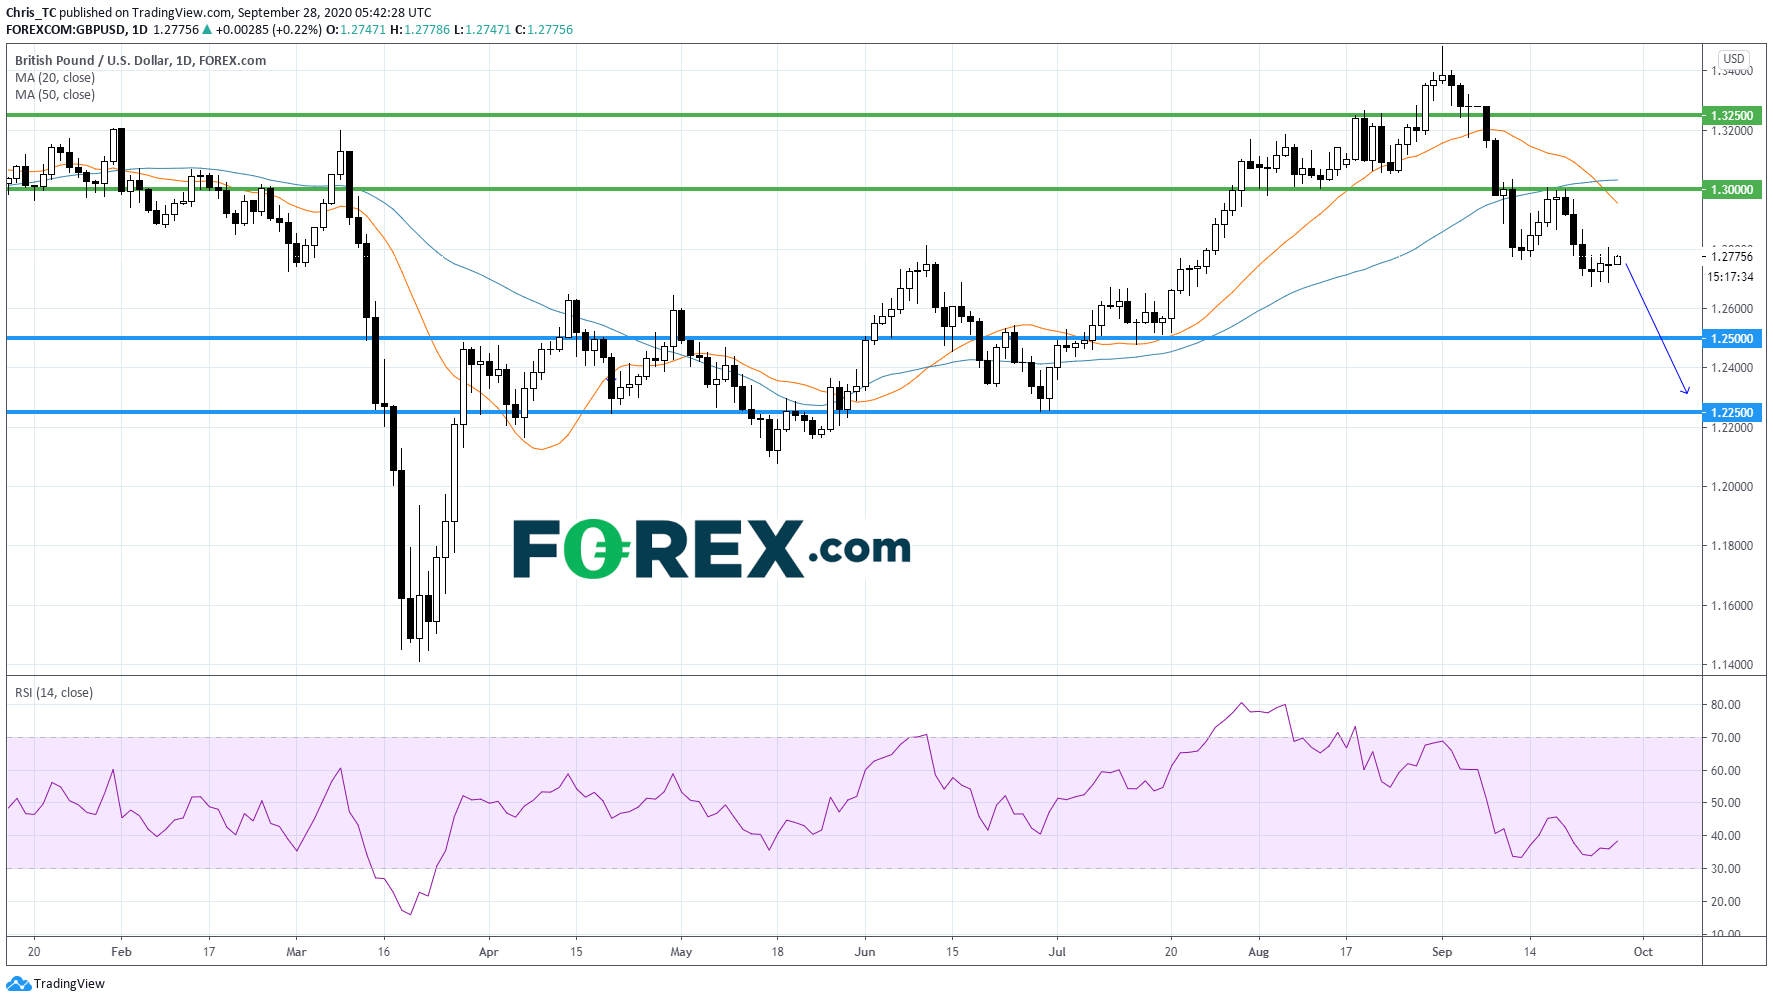 Chart analysis of Pound Sterling(GBP) to US Dollar(USD). Published in September 2020 by FOREX.com